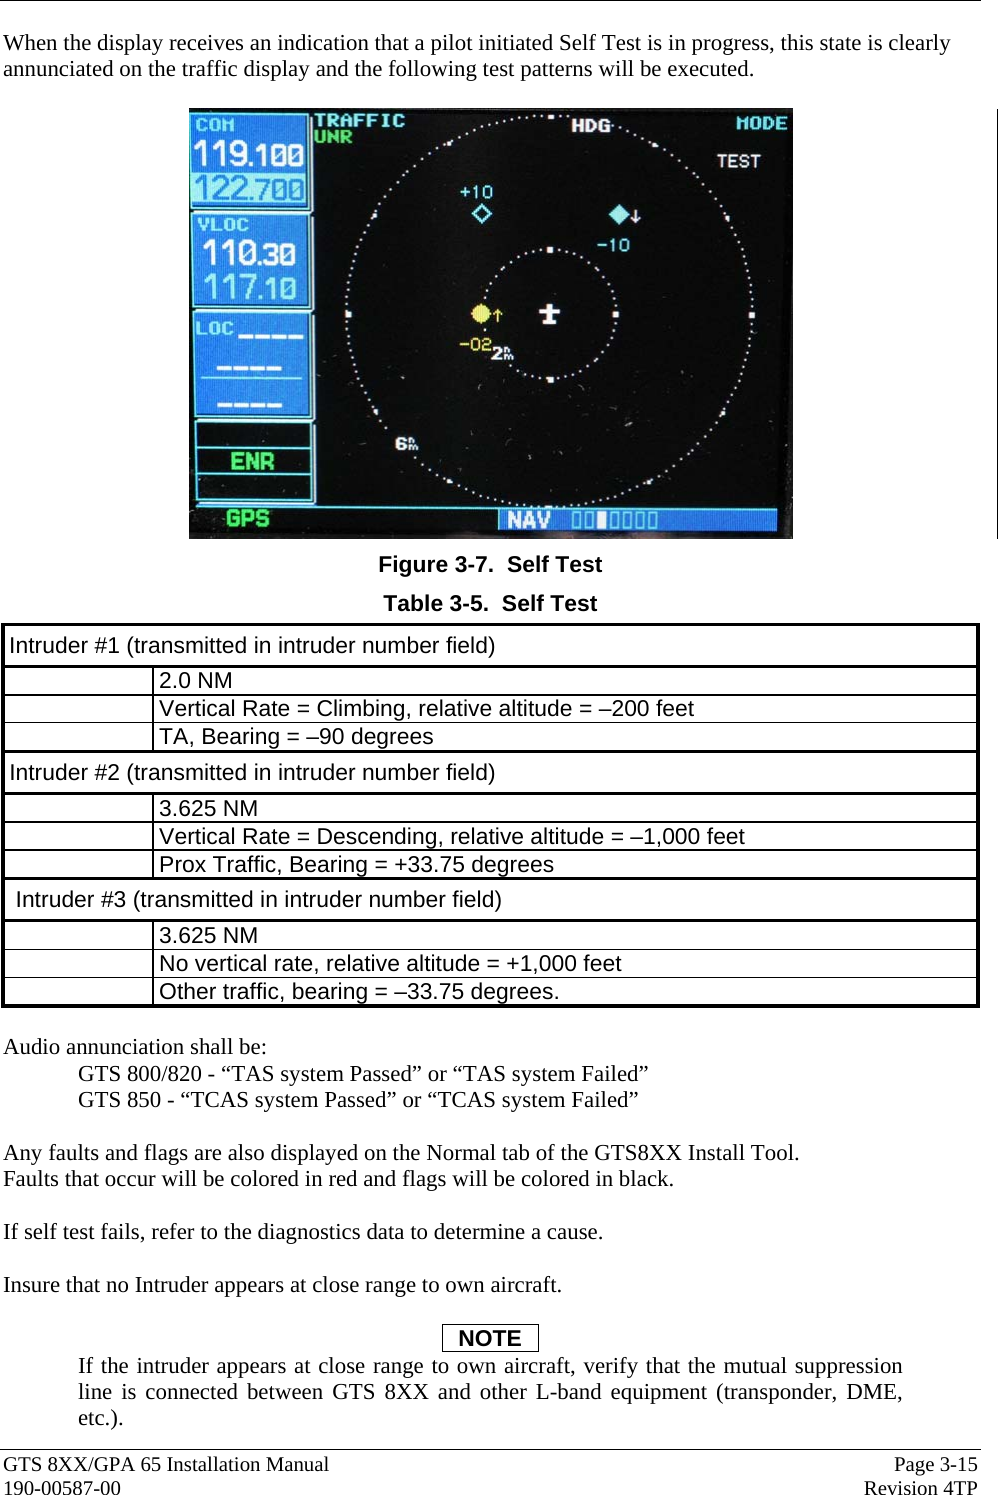  GTS 8XX/GPA 65 Installation Manual  Page 3-15 190-00587-00  Revision 4TP When the display receives an indication that a pilot initiated Self Test is in progress, this state is clearly annunciated on the traffic display and the following test patterns will be executed.   Figure 3-7.  Self Test Table 3-5.  Self Test Intruder #1 (transmitted in intruder number field)    2.0 NM  Vertical Rate = Climbing, relative altitude = –200 feet  TA, Bearing = –90 degrees Intruder #2 (transmitted in intruder number field)  3.625 NM  Vertical Rate = Descending, relative altitude = –1,000 feet  Prox Traffic, Bearing = +33.75 degrees  Intruder #3 (transmitted in intruder number field)  3.625 NM  No vertical rate, relative altitude = +1,000 feet  Other traffic, bearing = –33.75 degrees.  Audio annunciation shall be: GTS 800/820 - “TAS system Passed” or “TAS system Failed” GTS 850 - “TCAS system Passed” or “TCAS system Failed”  Any faults and flags are also displayed on the Normal tab of the GTS8XX Install Tool.  Faults that occur will be colored in red and flags will be colored in black.   If self test fails, refer to the diagnostics data to determine a cause.  Insure that no Intruder appears at close range to own aircraft.    NOTE If the intruder appears at close range to own aircraft, verify that the mutual suppression line is connected between GTS 8XX and other L-band equipment (transponder, DME, etc.). 